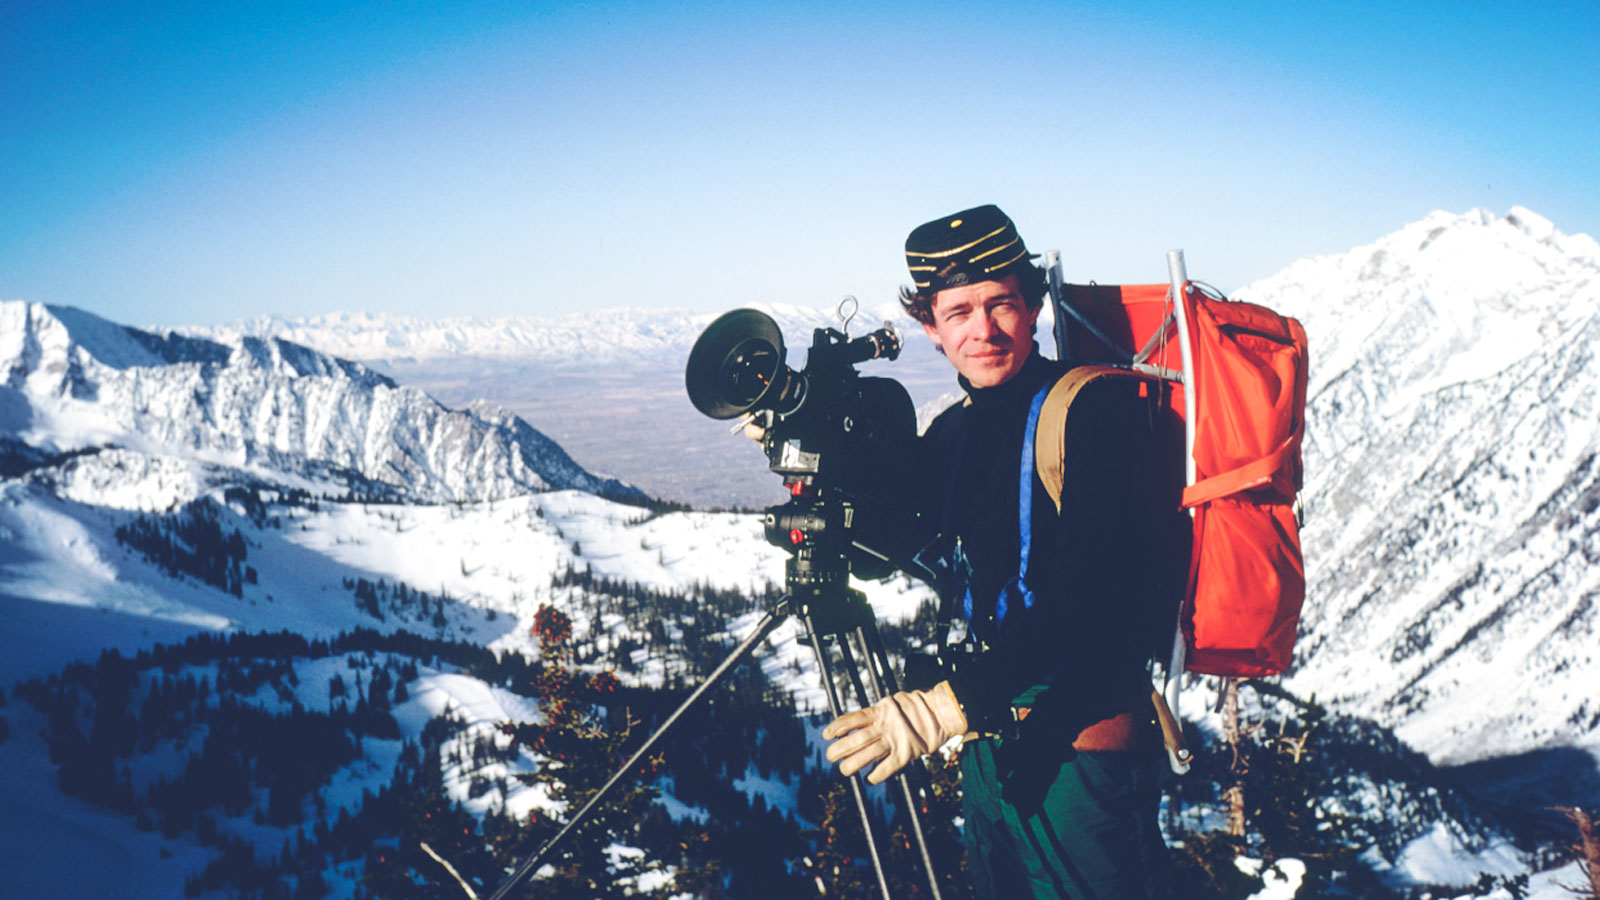 Jim Larison filming in the Wasatch Mountains of Utah